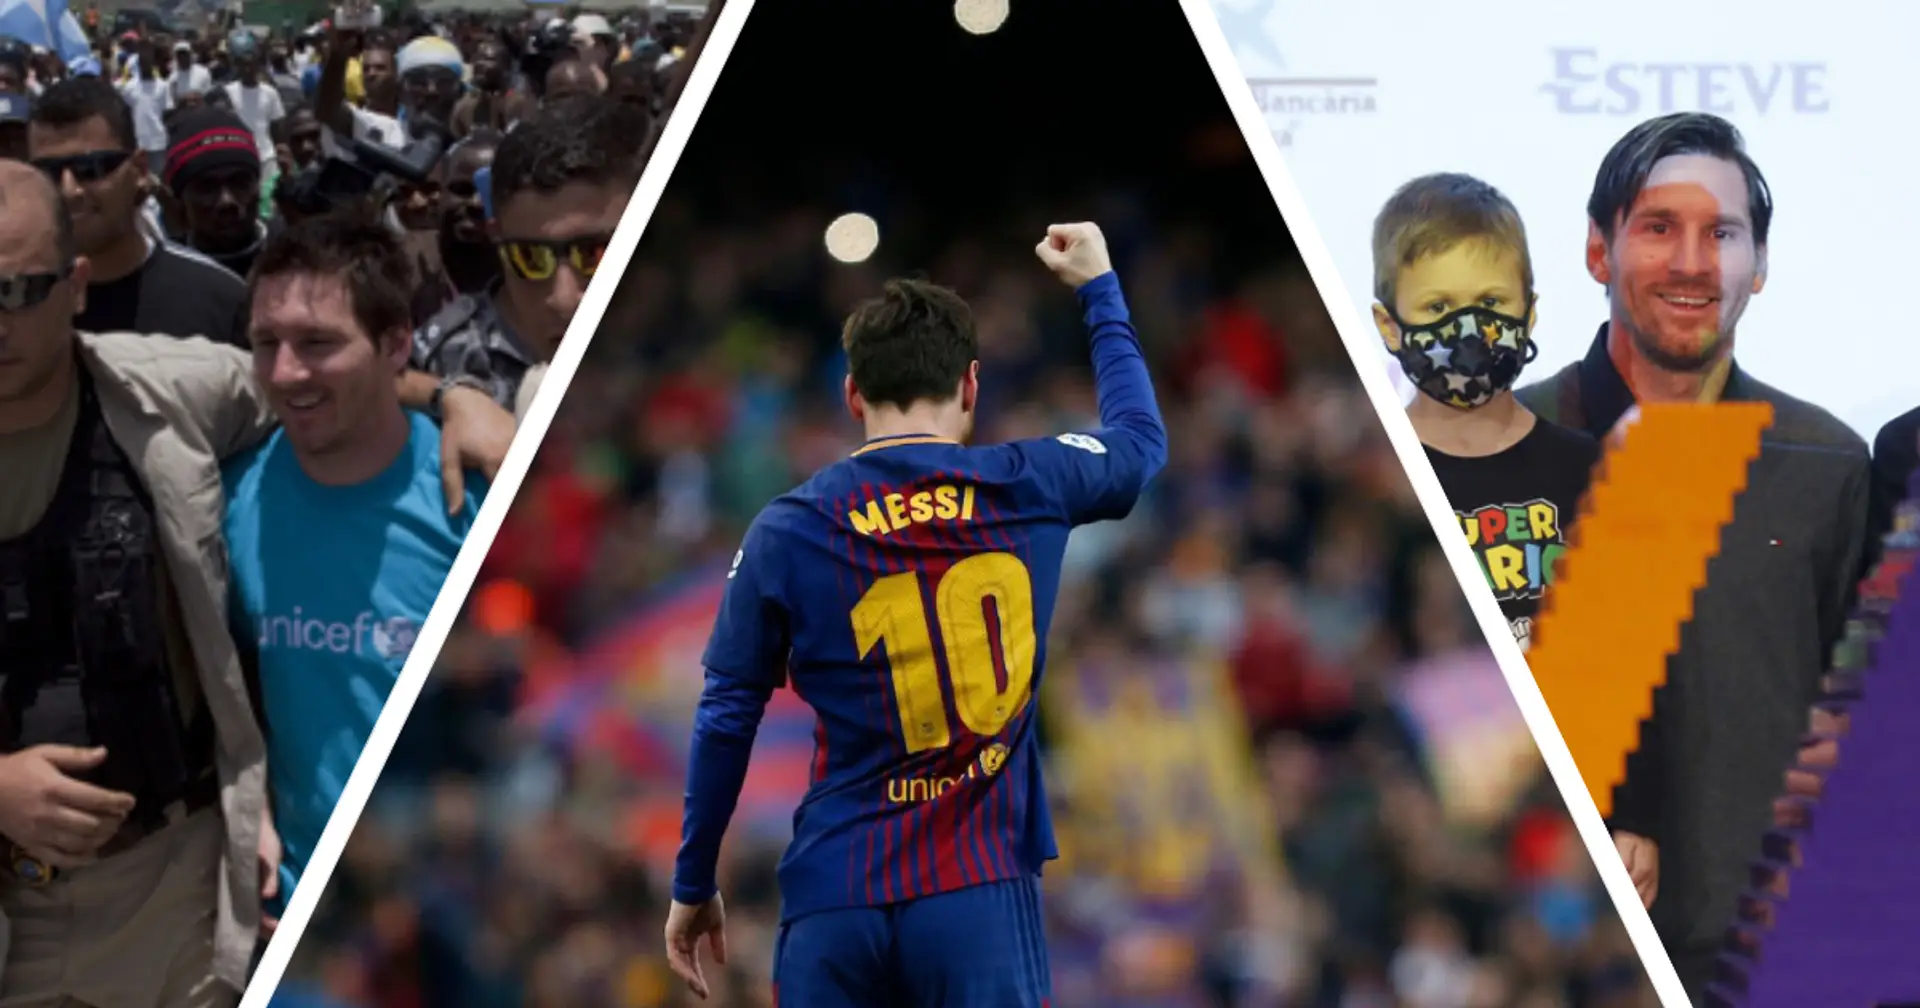 Magician on and off the field: A look at Messi's top 7 acts of kindness